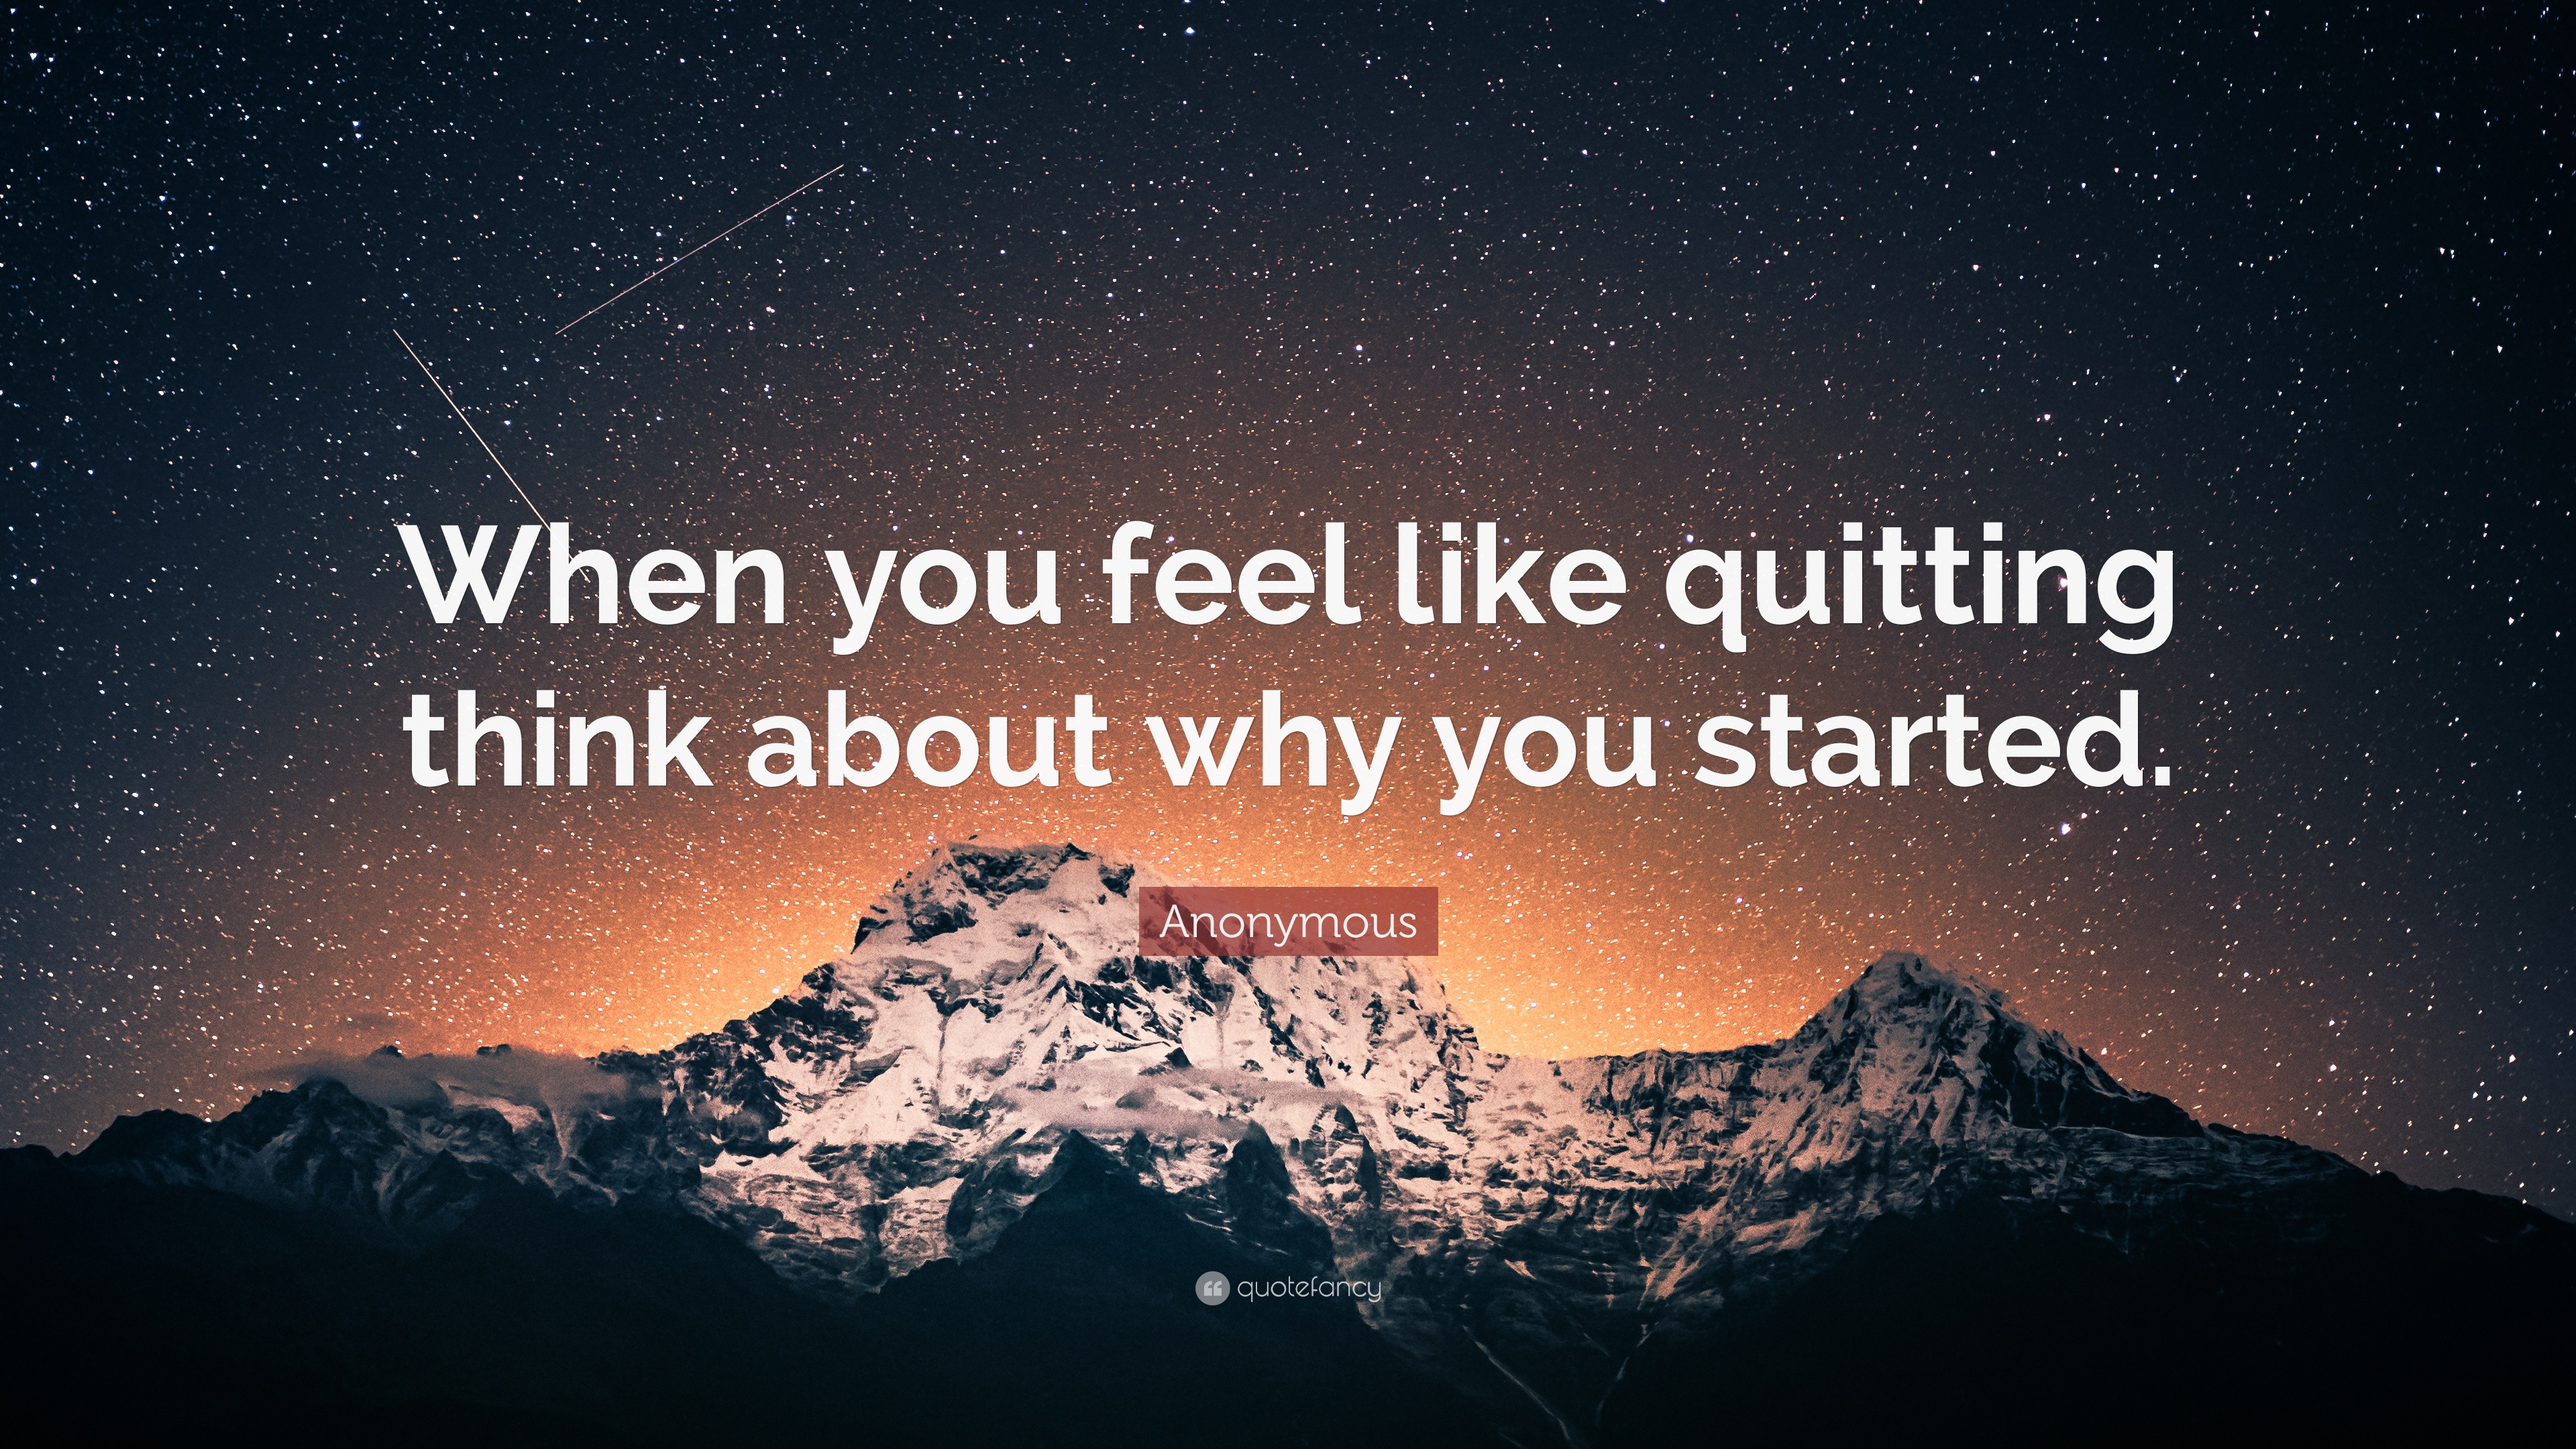 Anonymous Quote “When you feel like quitting think about